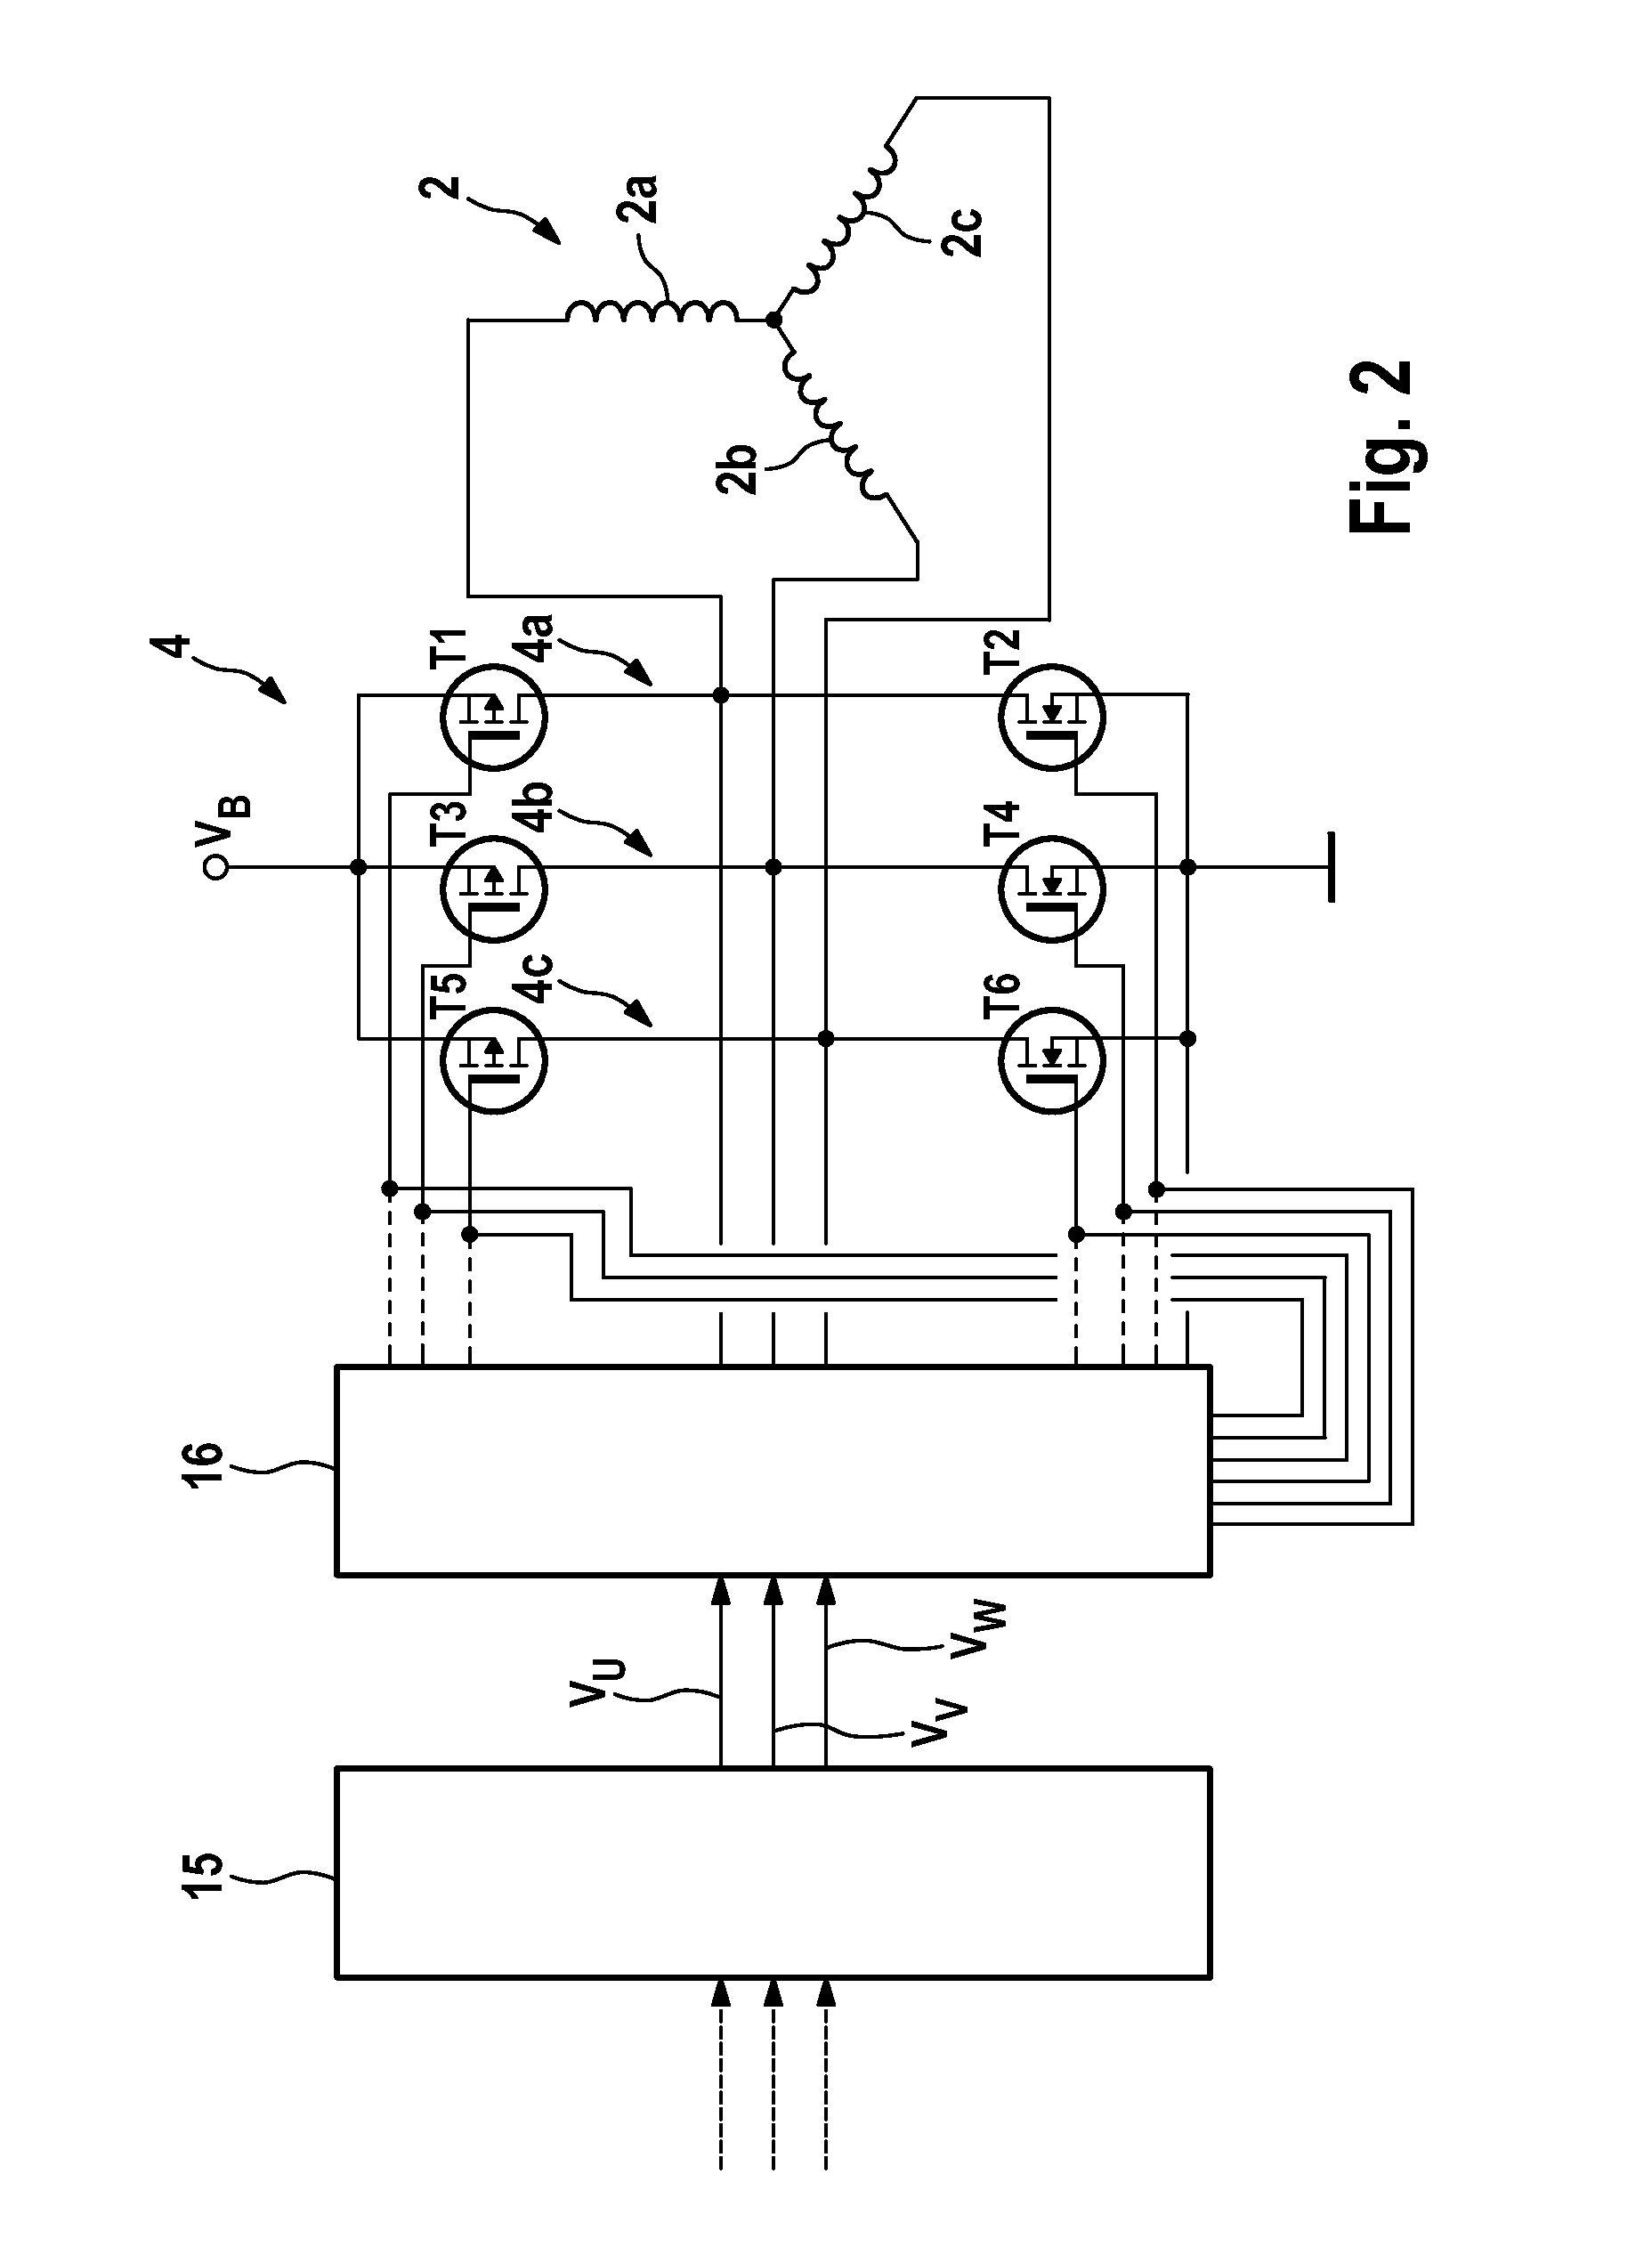 Method for Controlling an Electronically Commutated Polyphase DC Motor